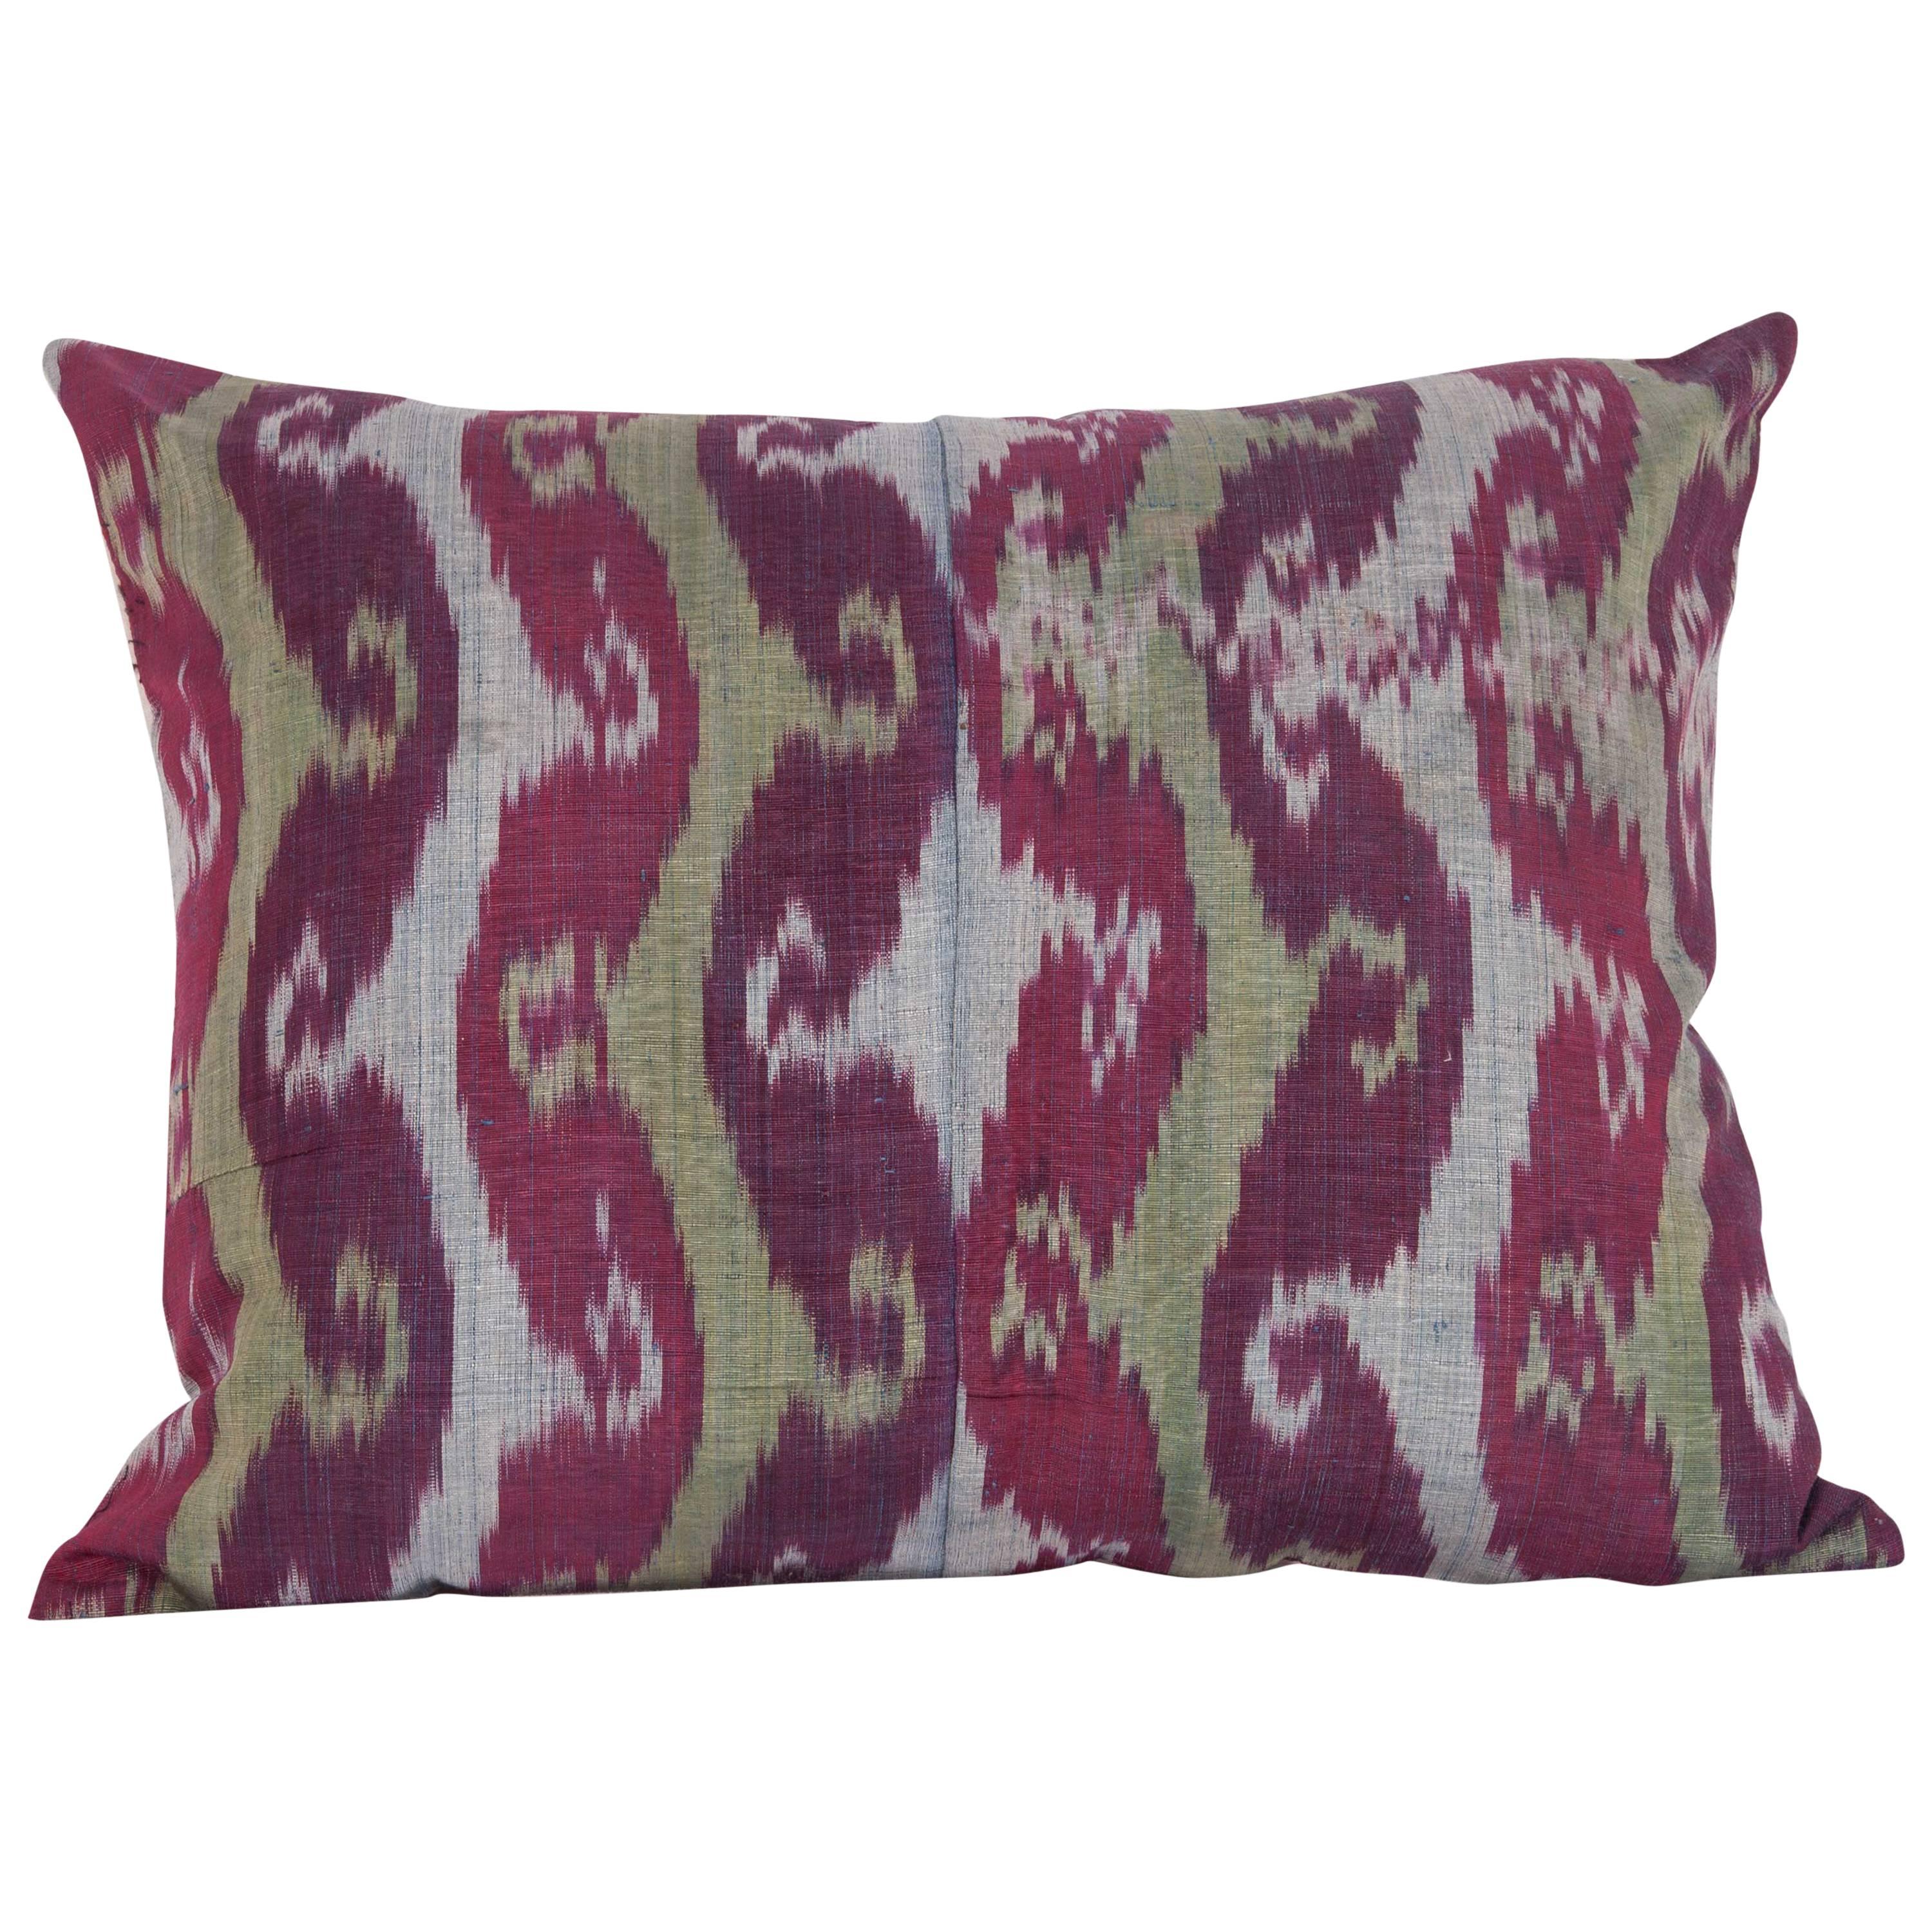 Antique Ikat Pillow Case Fashioned from a Late 19th Century Tajik Ikat